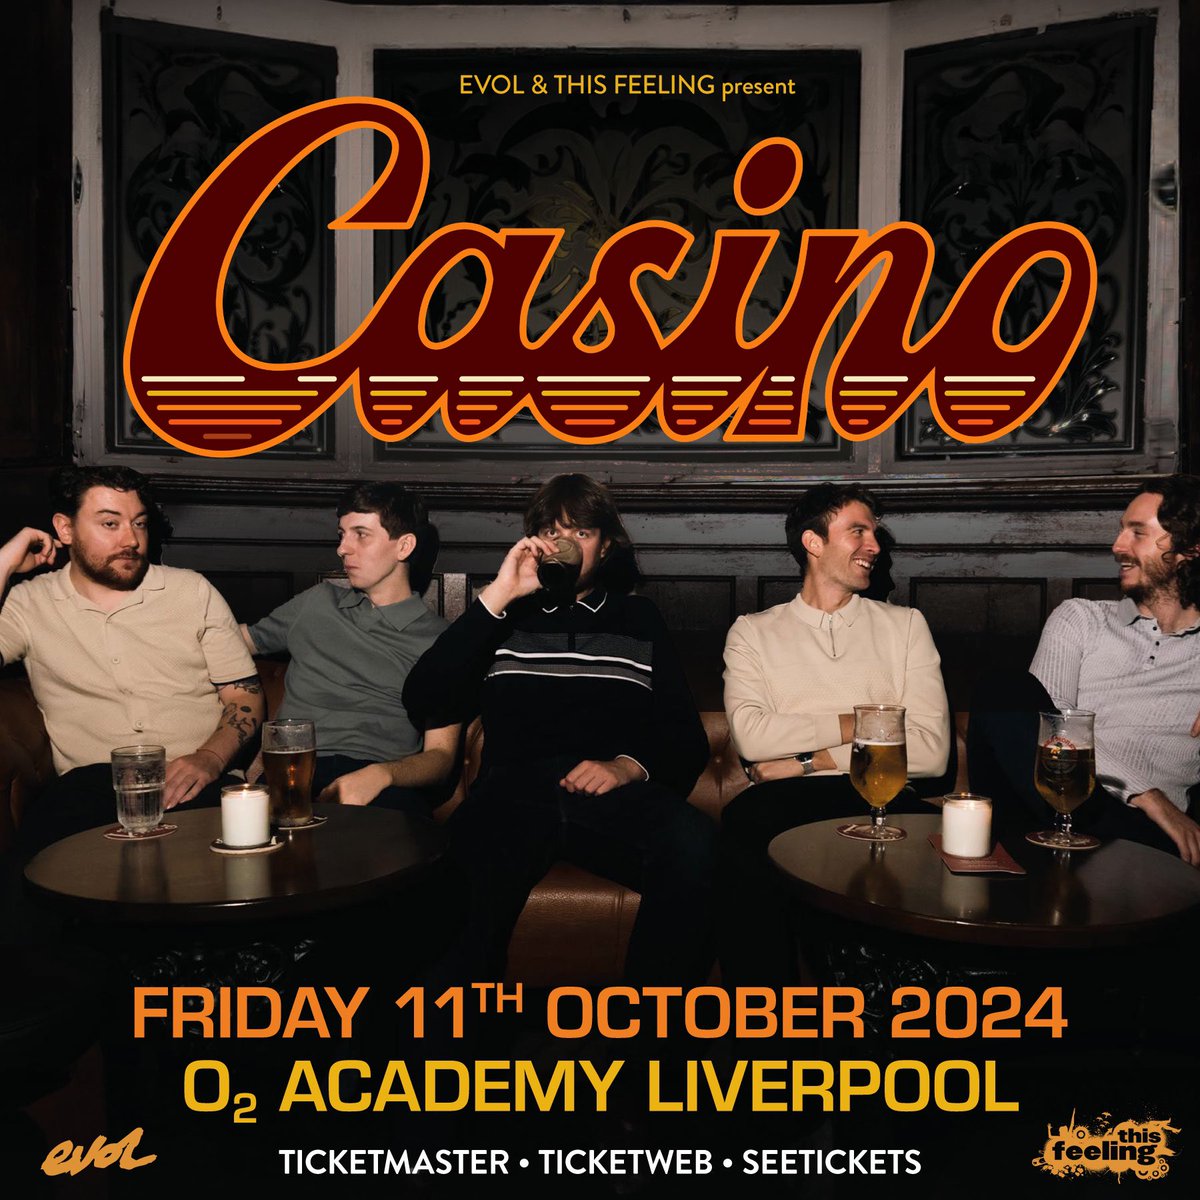 𝐁𝐈𝐆𝐆𝐄𝐒𝐓 𝐇𝐄𝐀𝐃𝐋𝐈𝐍𝐄 𝐒𝐇𝐎𝐖 𝐘𝐄𝐓 Fresh from supporting Liverpool indie legends @ZutonsThe, soulful groove machine @Casino_band_ continue their rise, headlining @O2AcademyLpool, Friday October 11th! Tickets: seetickets.com/event/casino/o… 📸 aliathomasphoto @erazer_mag